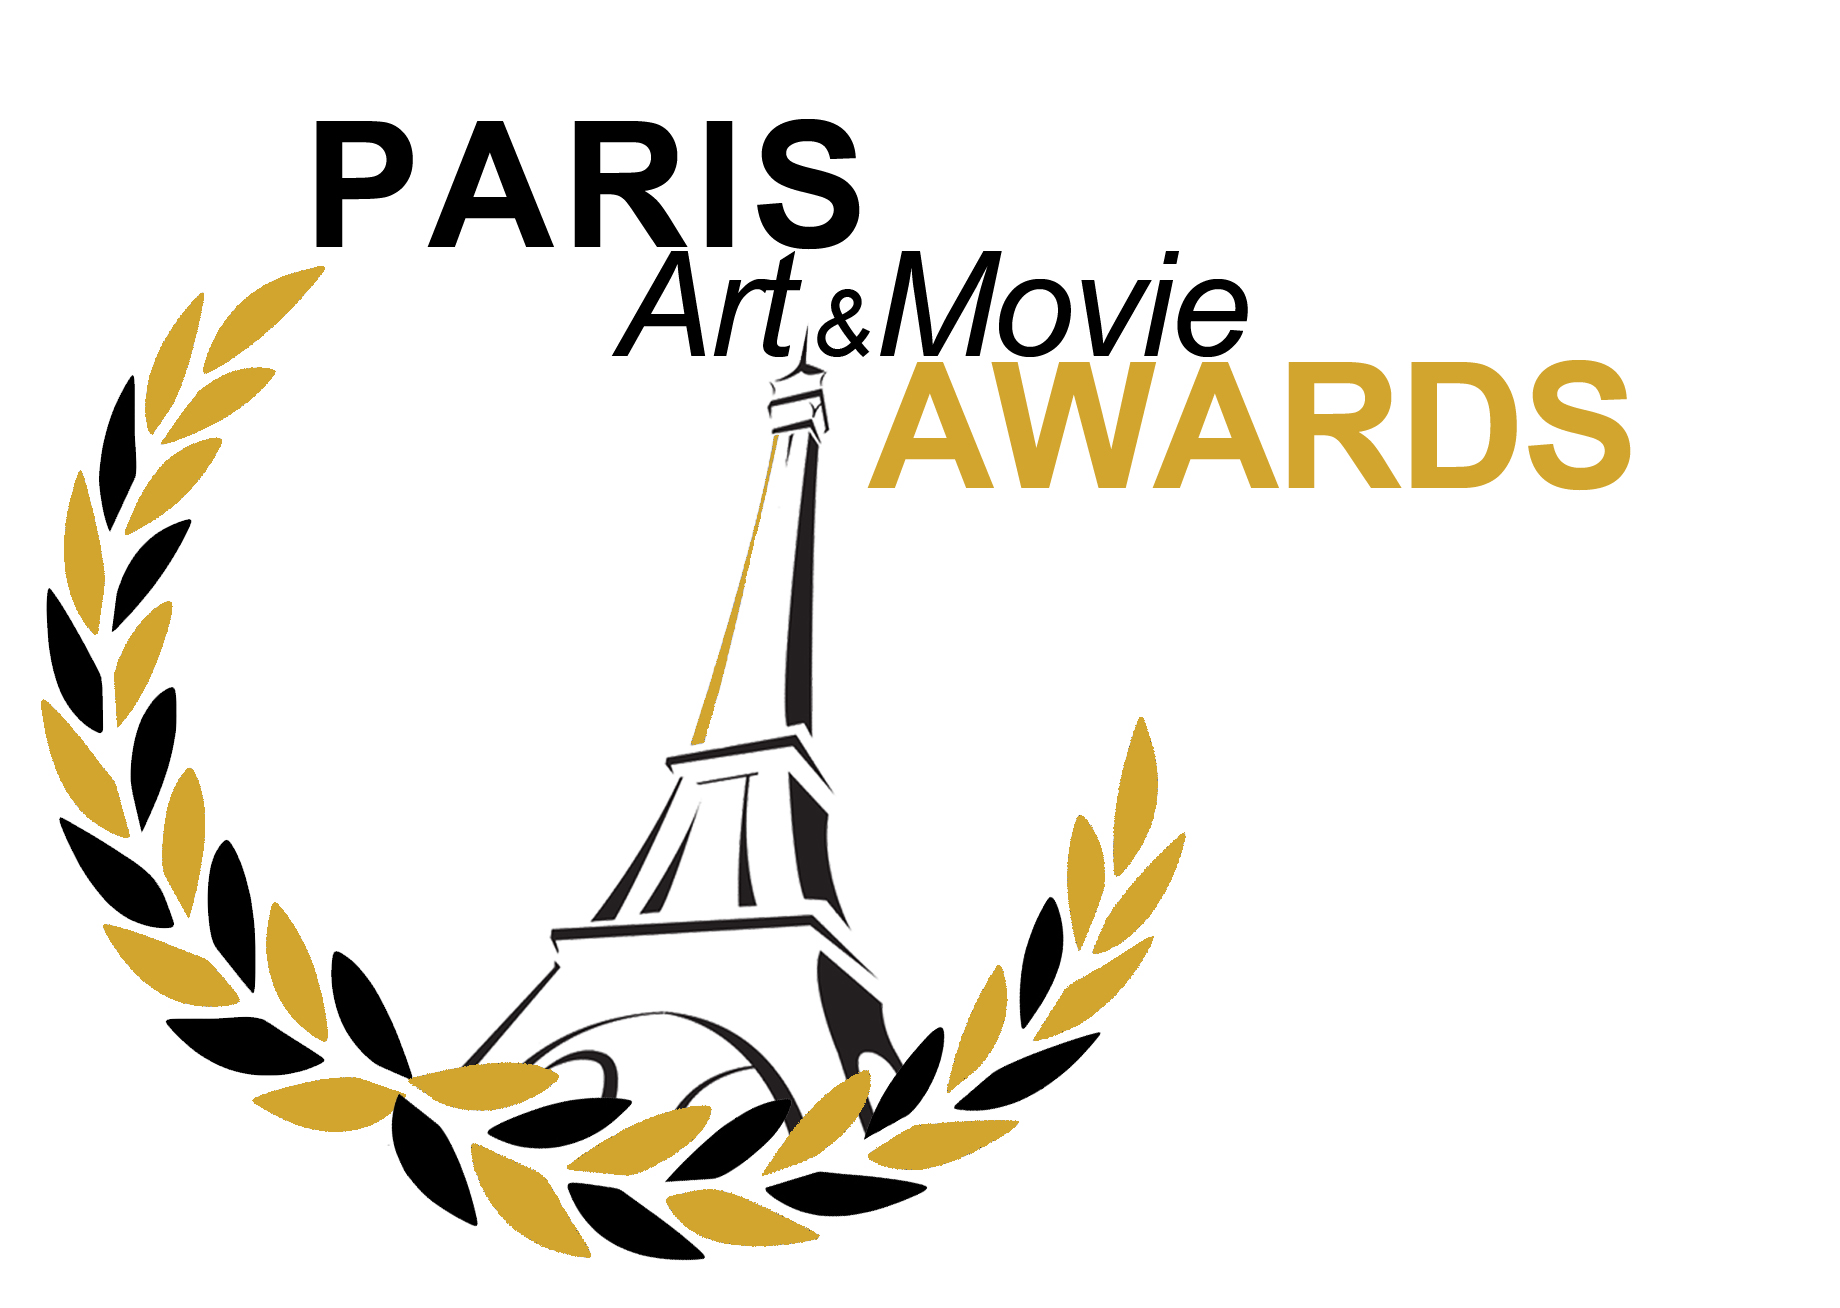 Film Festival and Award Ceremony I funded in Paris.